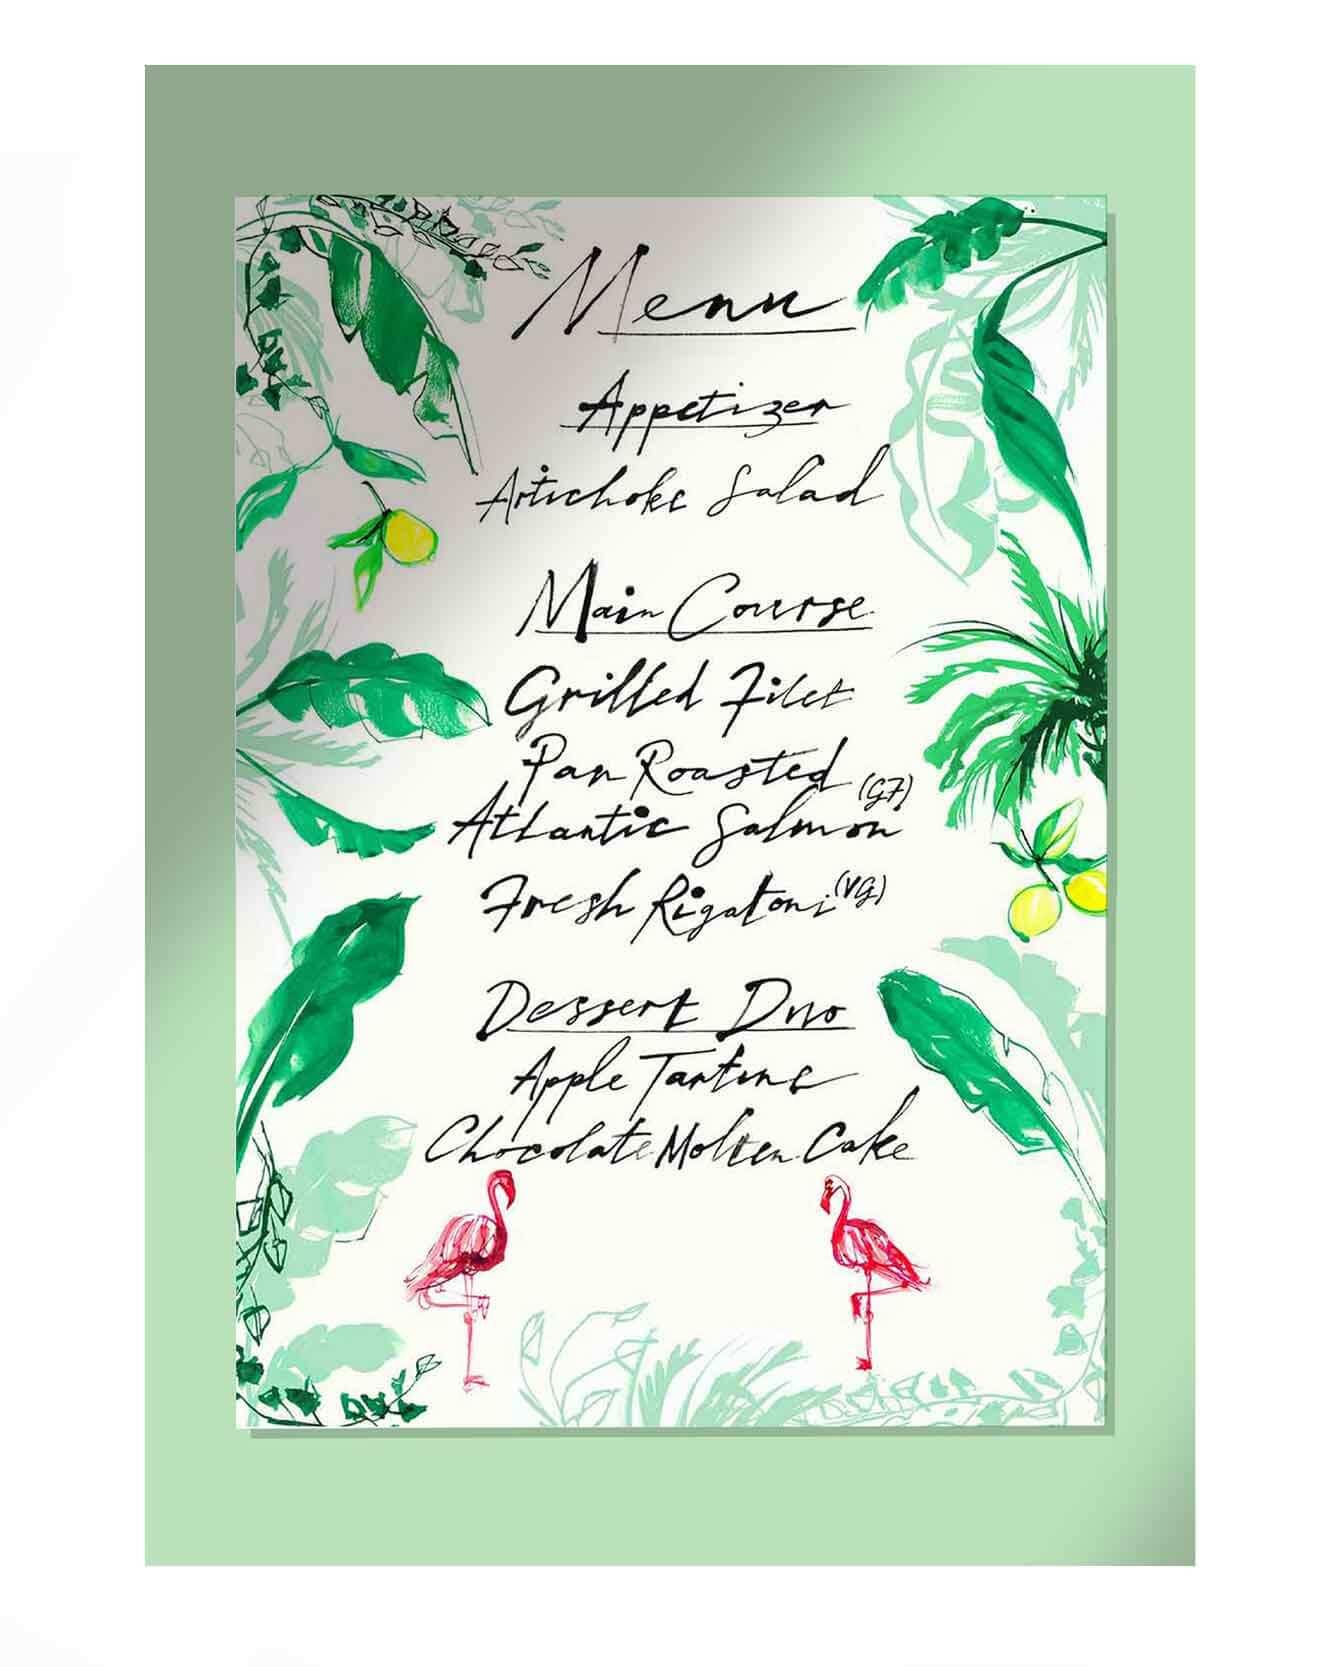 Illustrated and hand lettering menu inspired by palm trees and flamingos - for an exclusive Amazon Influencer event at Beverley Hill Hotel Los Angeles.